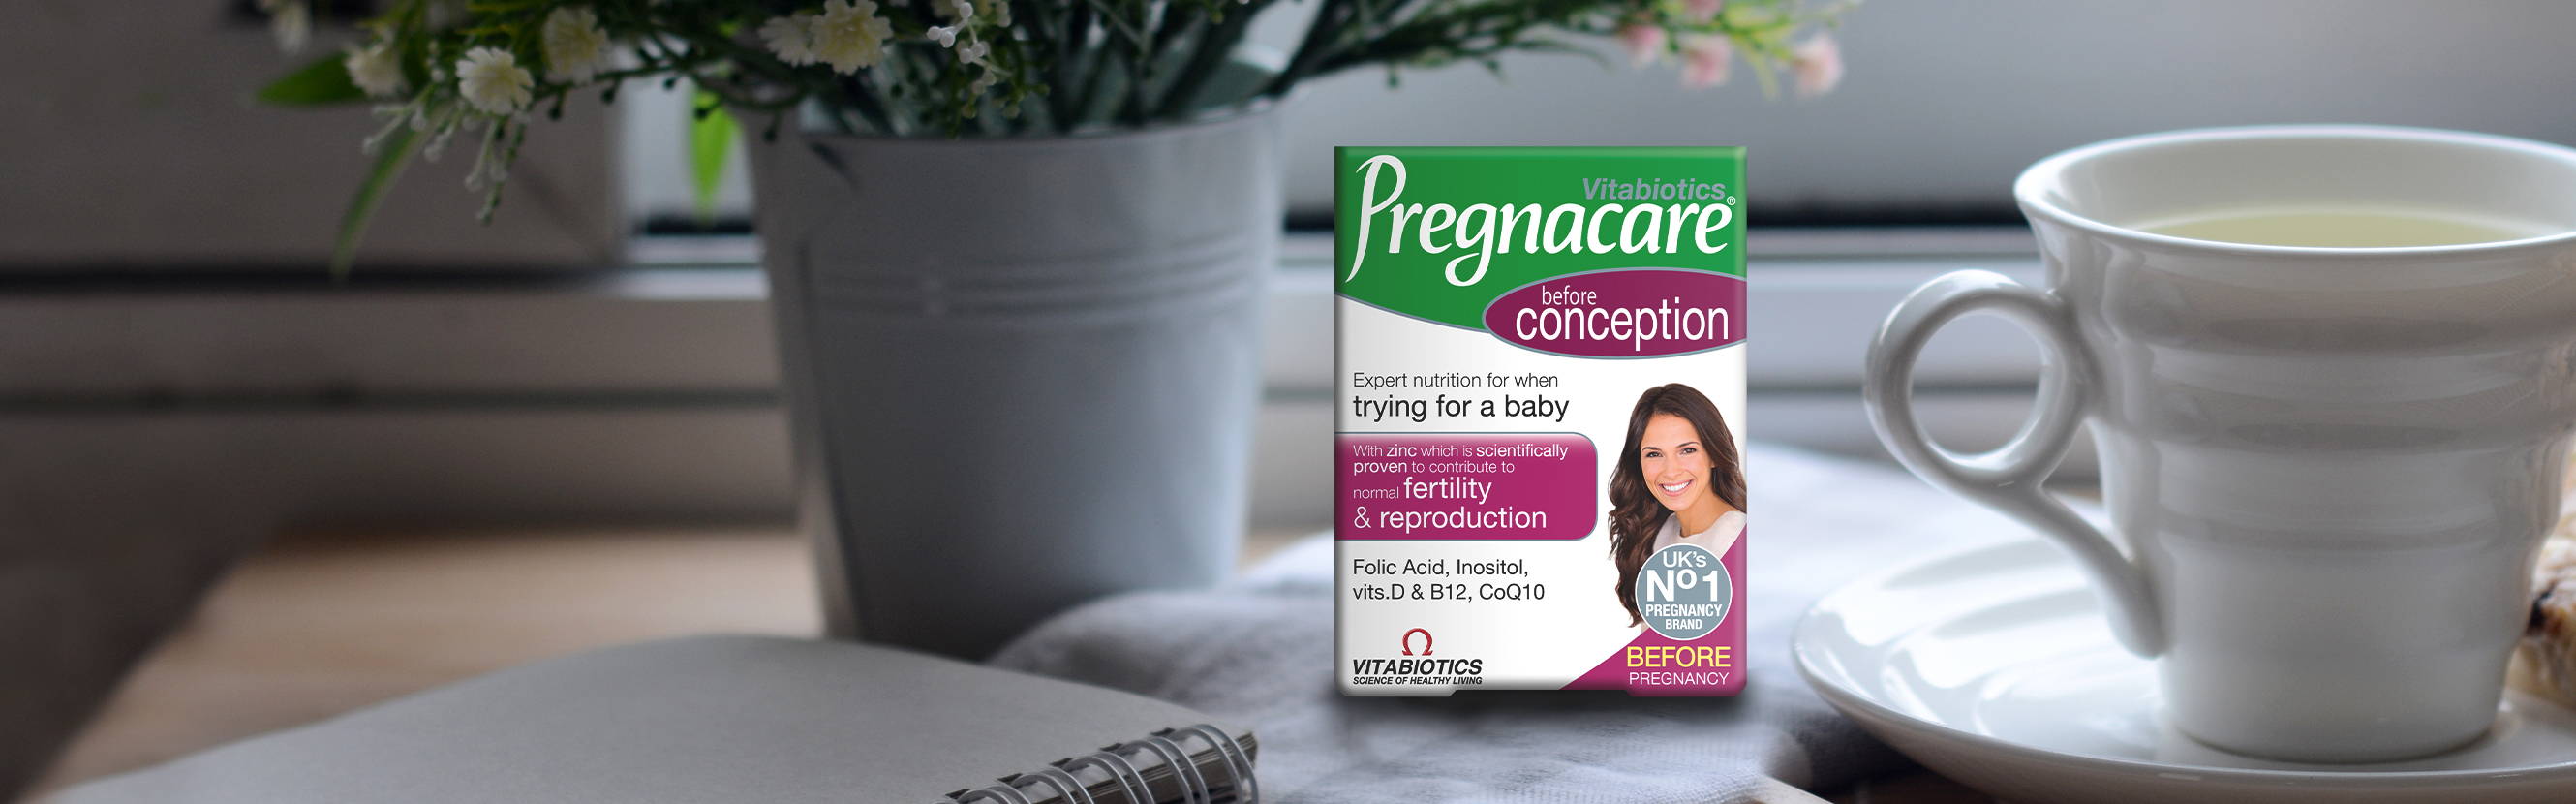  Thousands of women have chosen Pregnacare Conception when trying for a baby. No drugs, no hormones, just essential nutrients that studies show play an important role in building nutritional stores for pregnancy. It’s a little extra nutritional help to support  your reproductive health. 